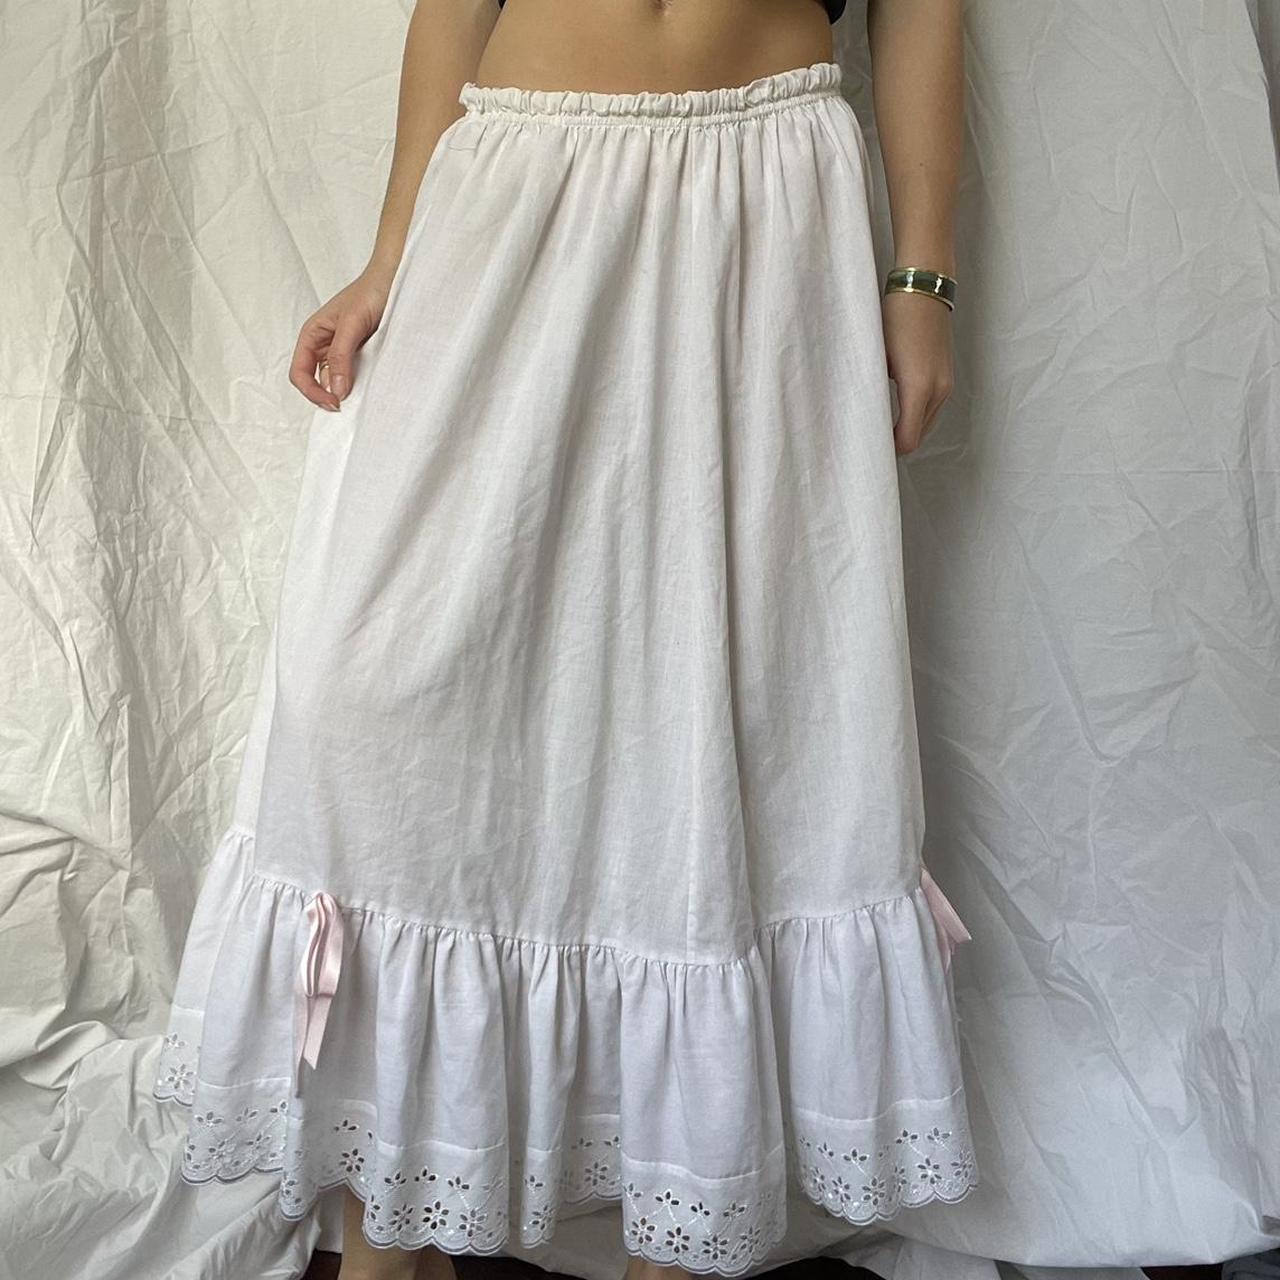 Coquette maxi slip skirt 🌷 In great condition and... - Depop